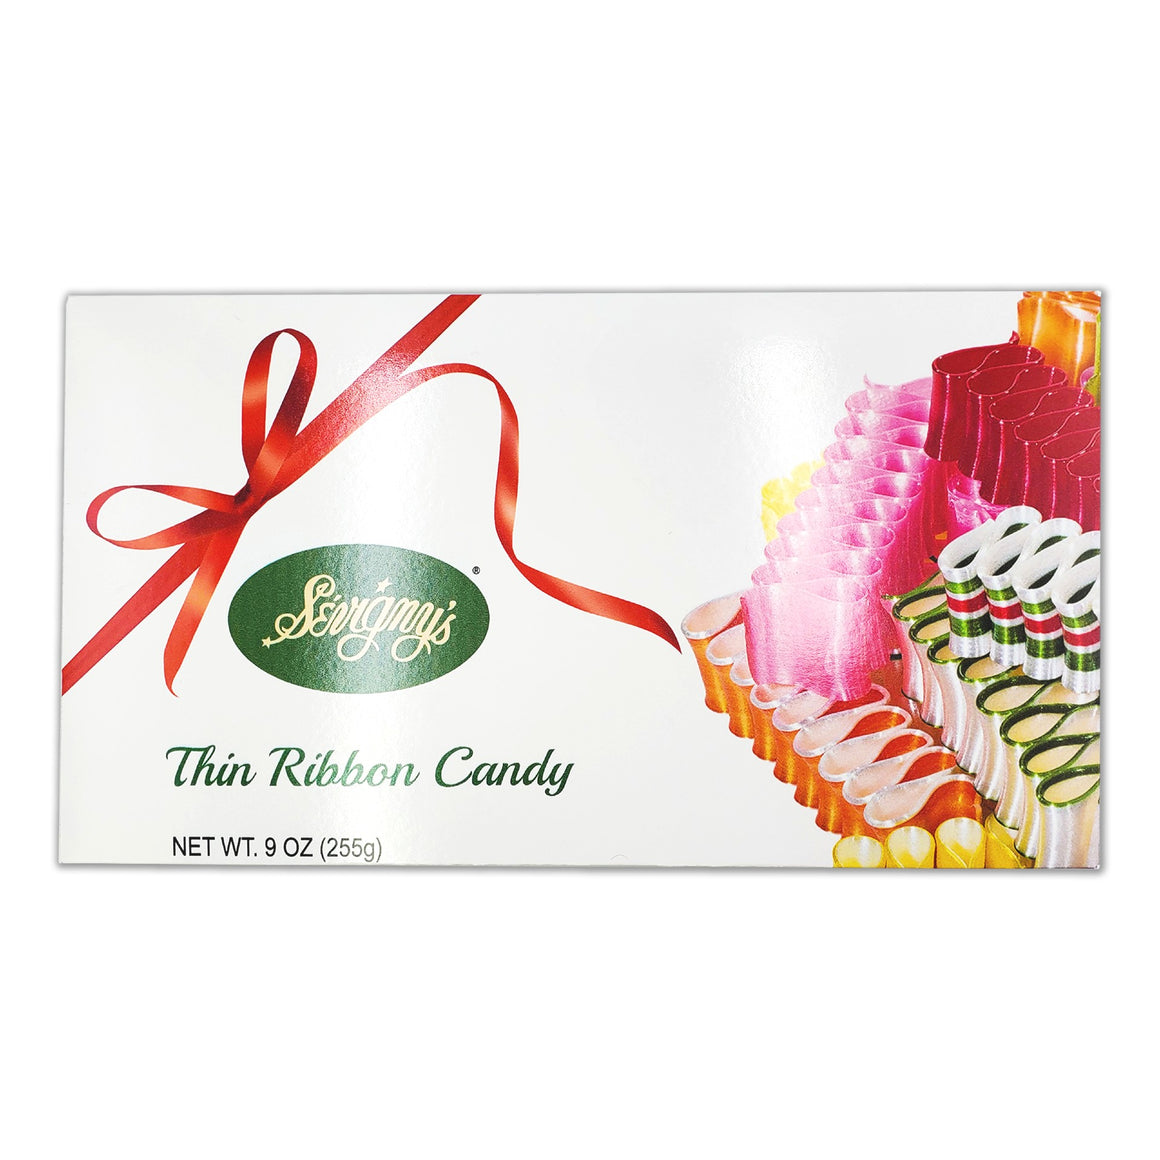 All City Candy Sevigny's Thin Ribbon Candy Assorted Flavors 9 oz. Box Christmas Quality Candy Company For fresh candy and great service, visit www.allcitycandy.com